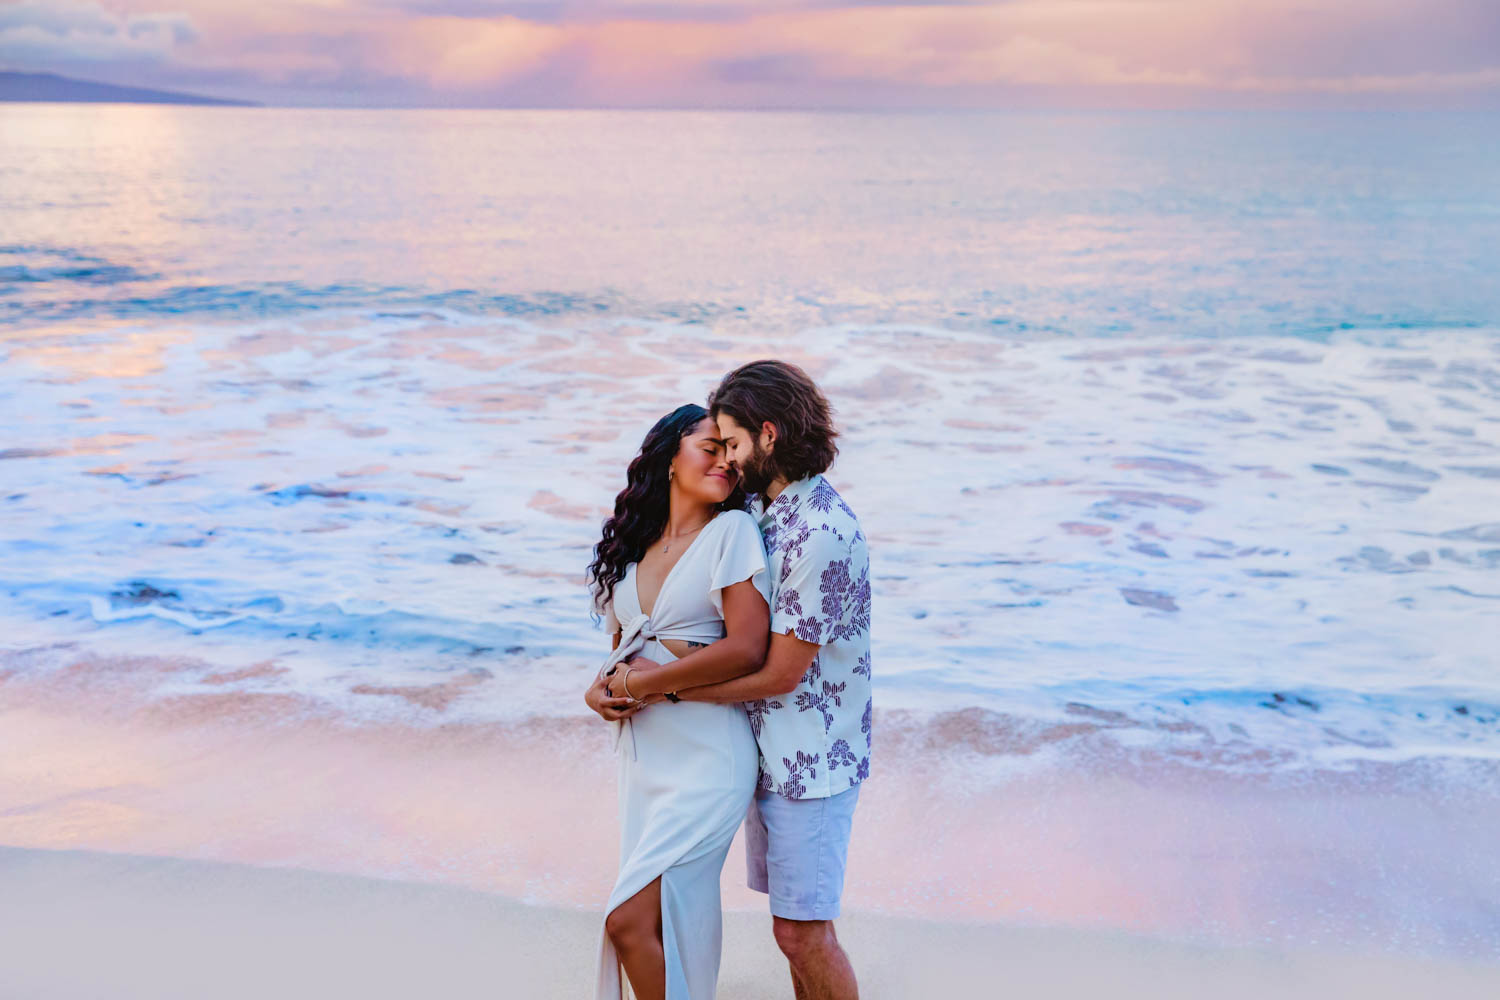 A couple embraces lovingly in front of the ocean during a sunrise beach photography session on Maui, Hawaii.